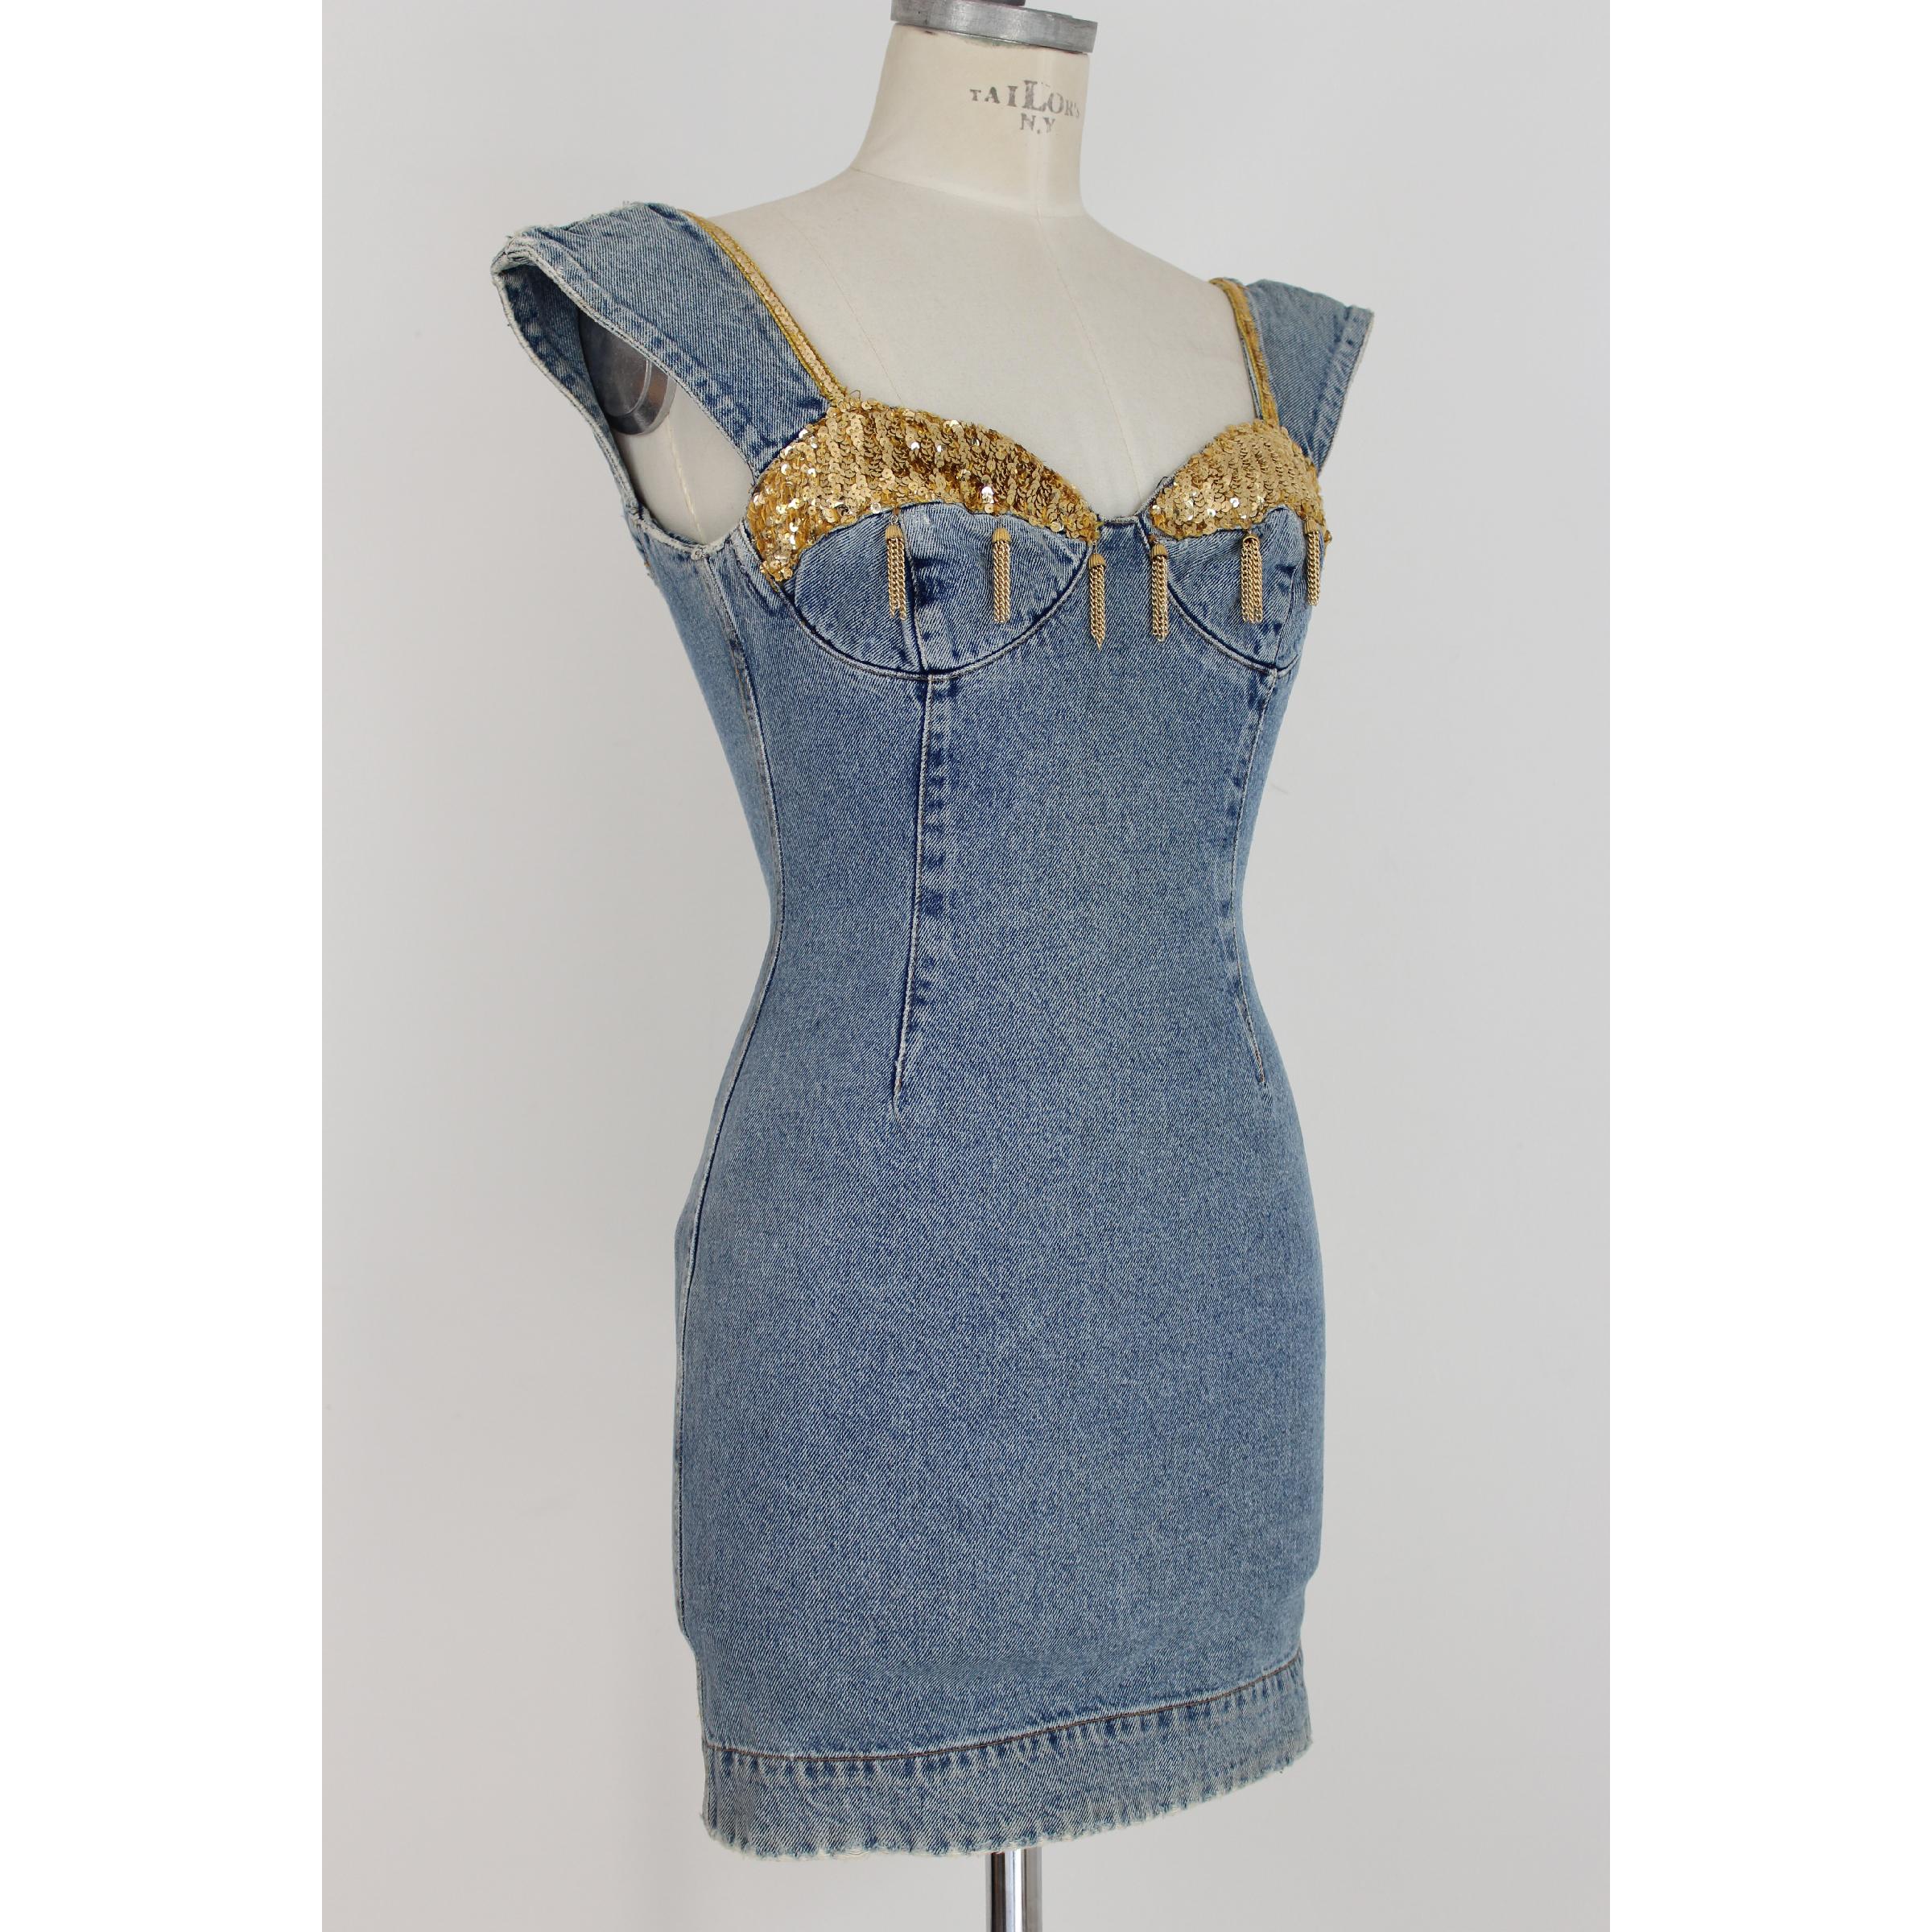 Katharine Hamnett vintage dress for woman. Jeans blue color, 100% cotton. Applications in golden sequins on the chest, sweetheart neckline, pockets with zips on the back. 90s. Excellent vintage condition.

Size: 40 It 6 Us 8 Uk

Shoulder: 40 cm
Bust